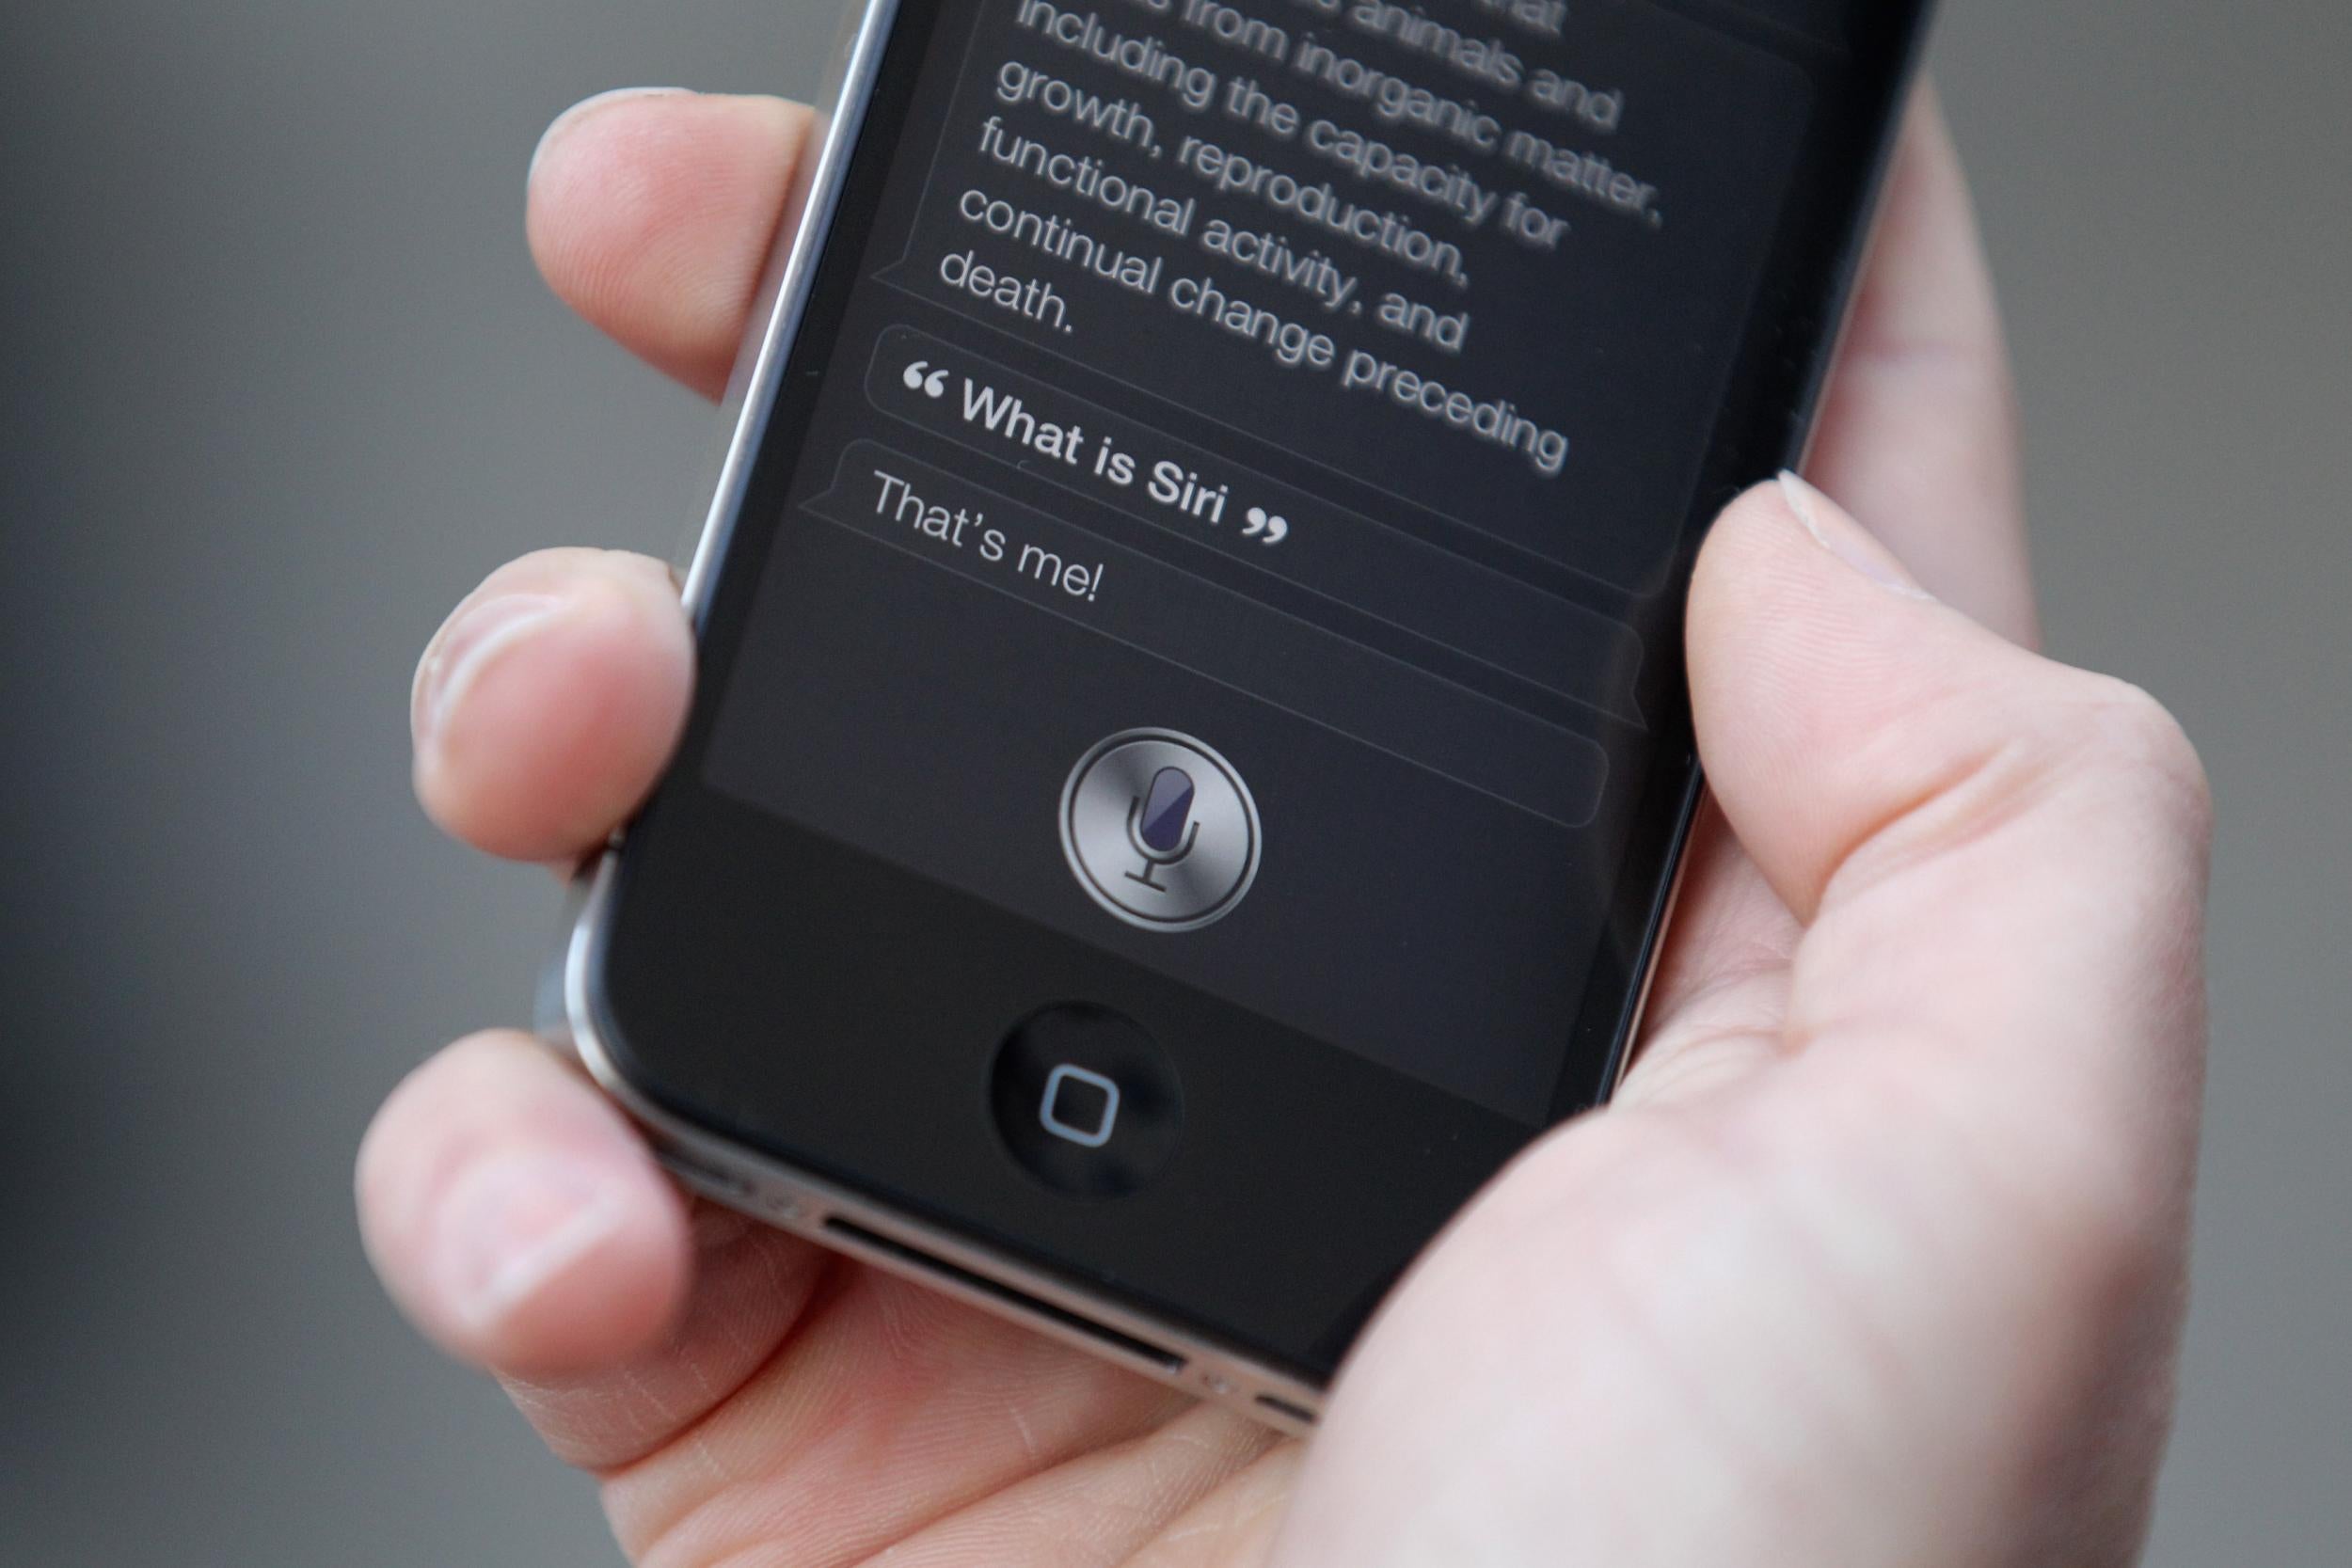 Voice-controlled assistants like Siri and Google Now could be a way into your phone